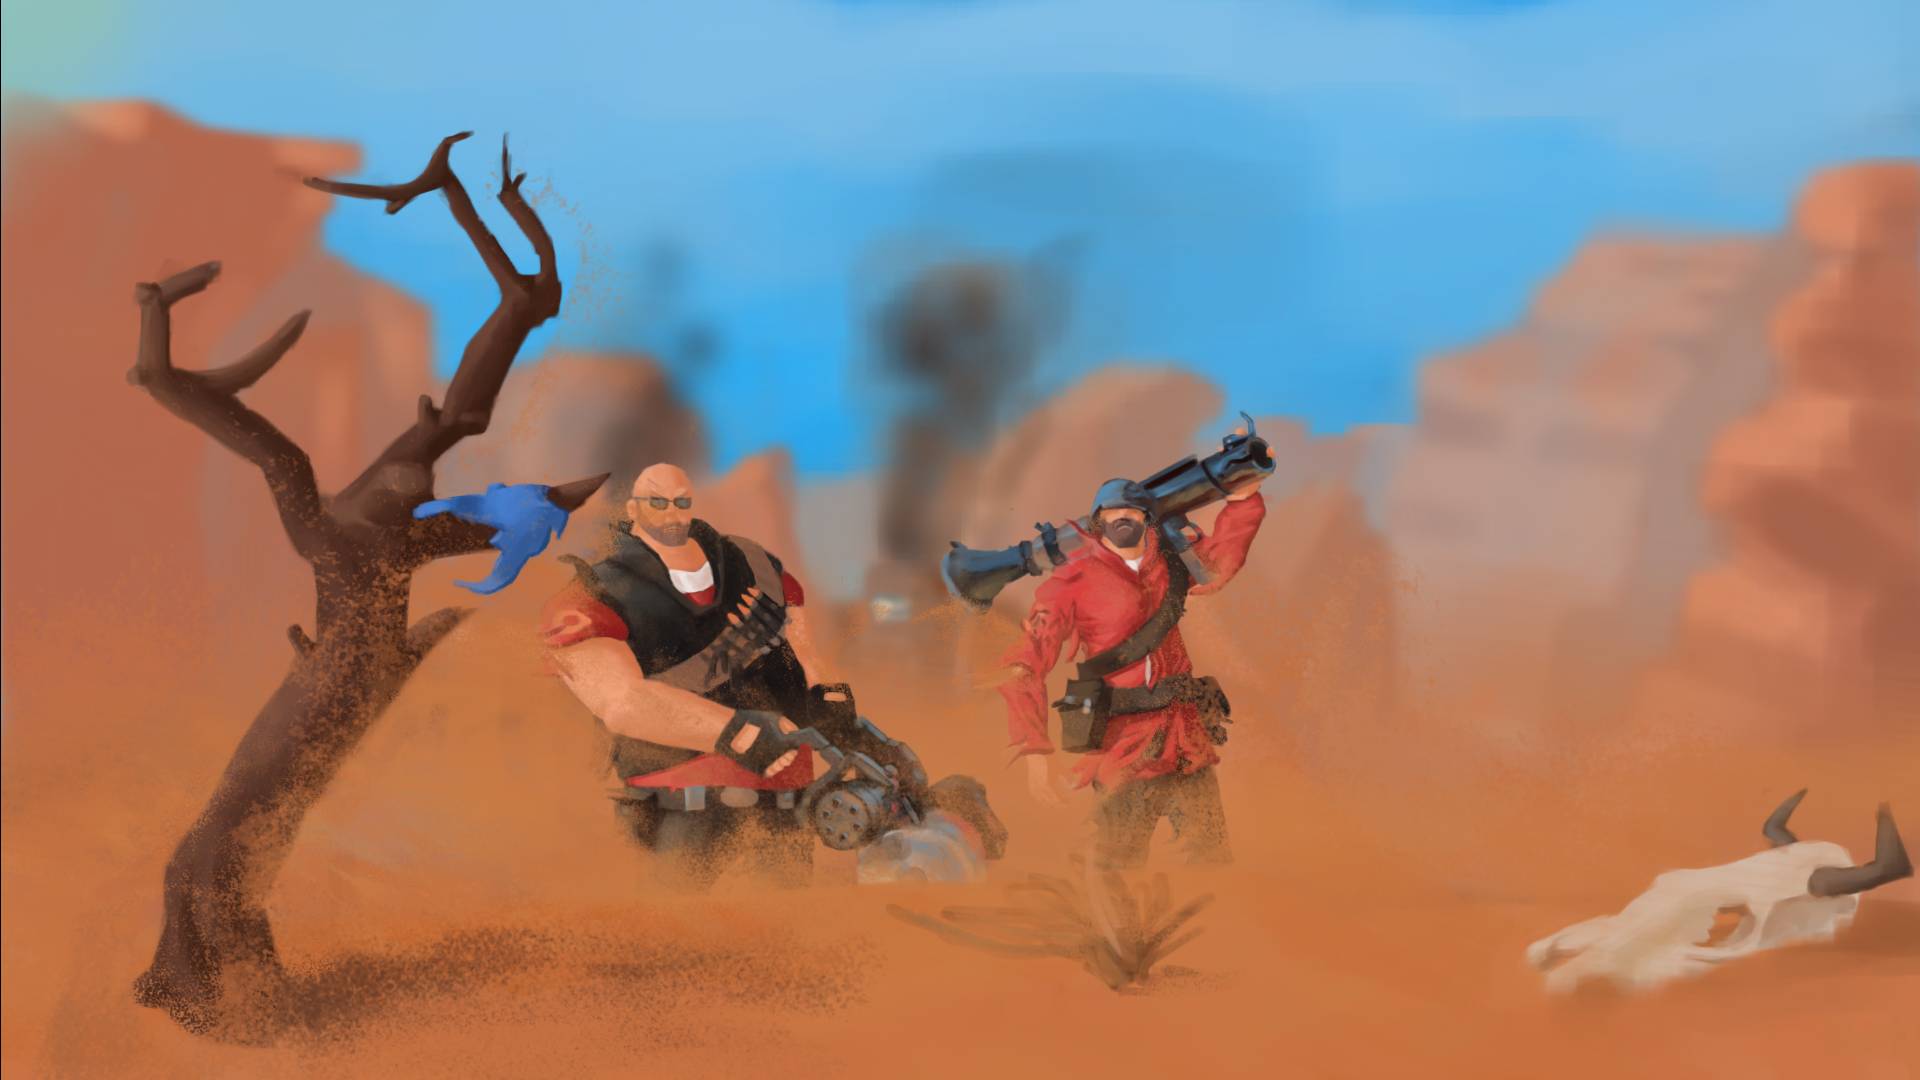 soldier_and_heavy_by_frenchdeathdesign-daocw4h.png